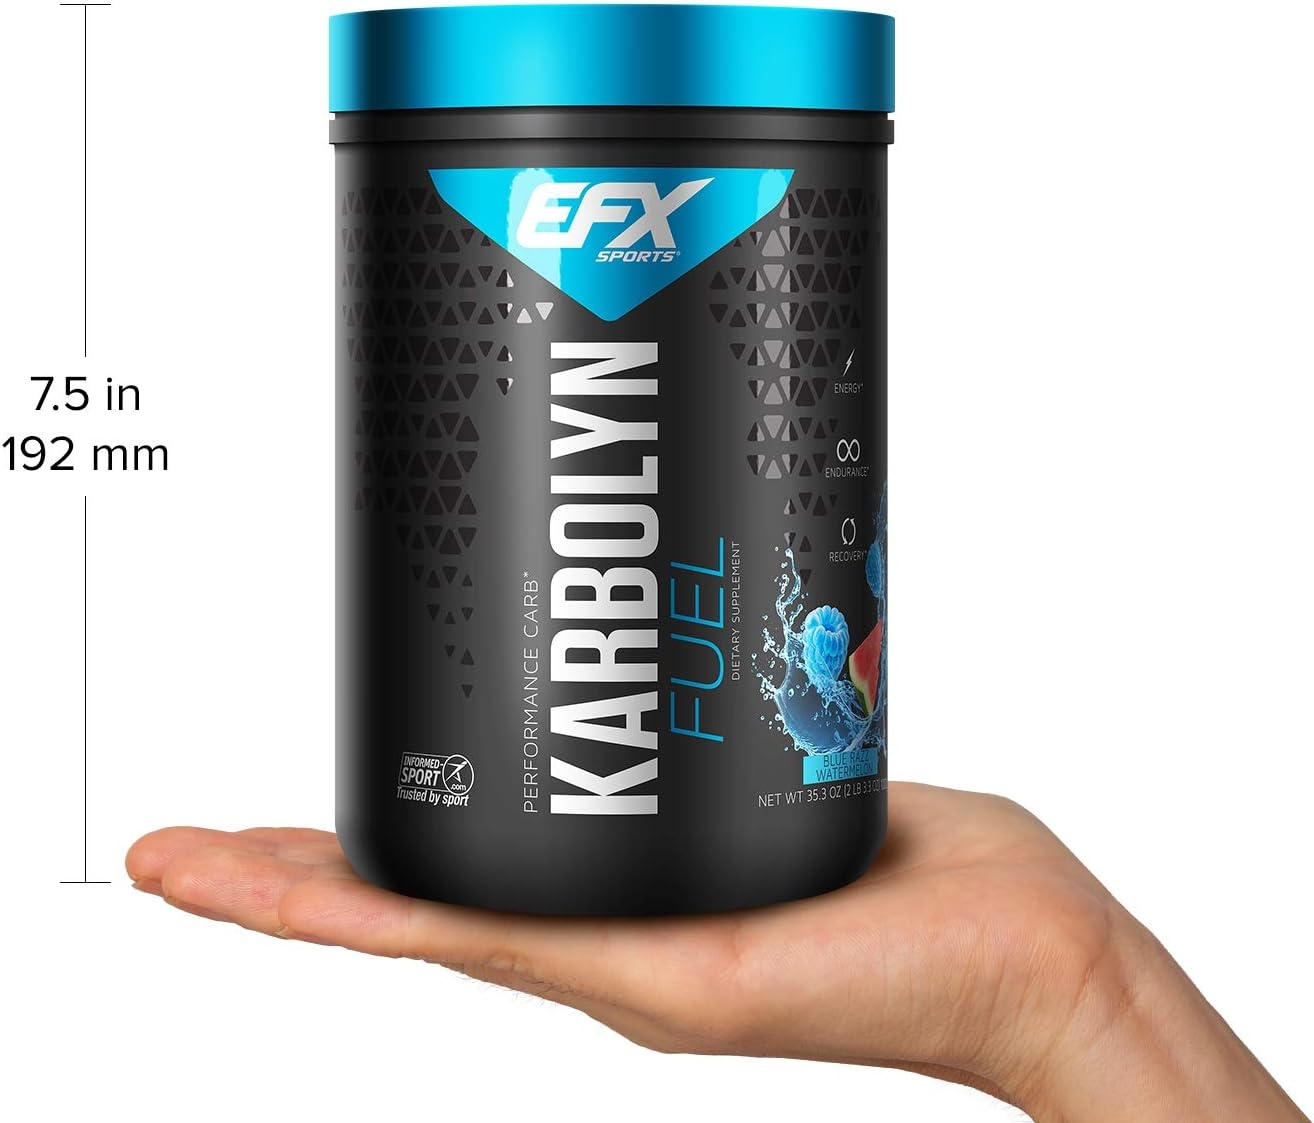 EFX Sports Karbolyn Fuel | Pre, Intra, Post Workout Carbohydrate Supplement Powder | Carb Load, Energize, Improve & Recover Faster | Easy to Mix | Blue Razz Watermelon (2LB 3.3 OZ)…